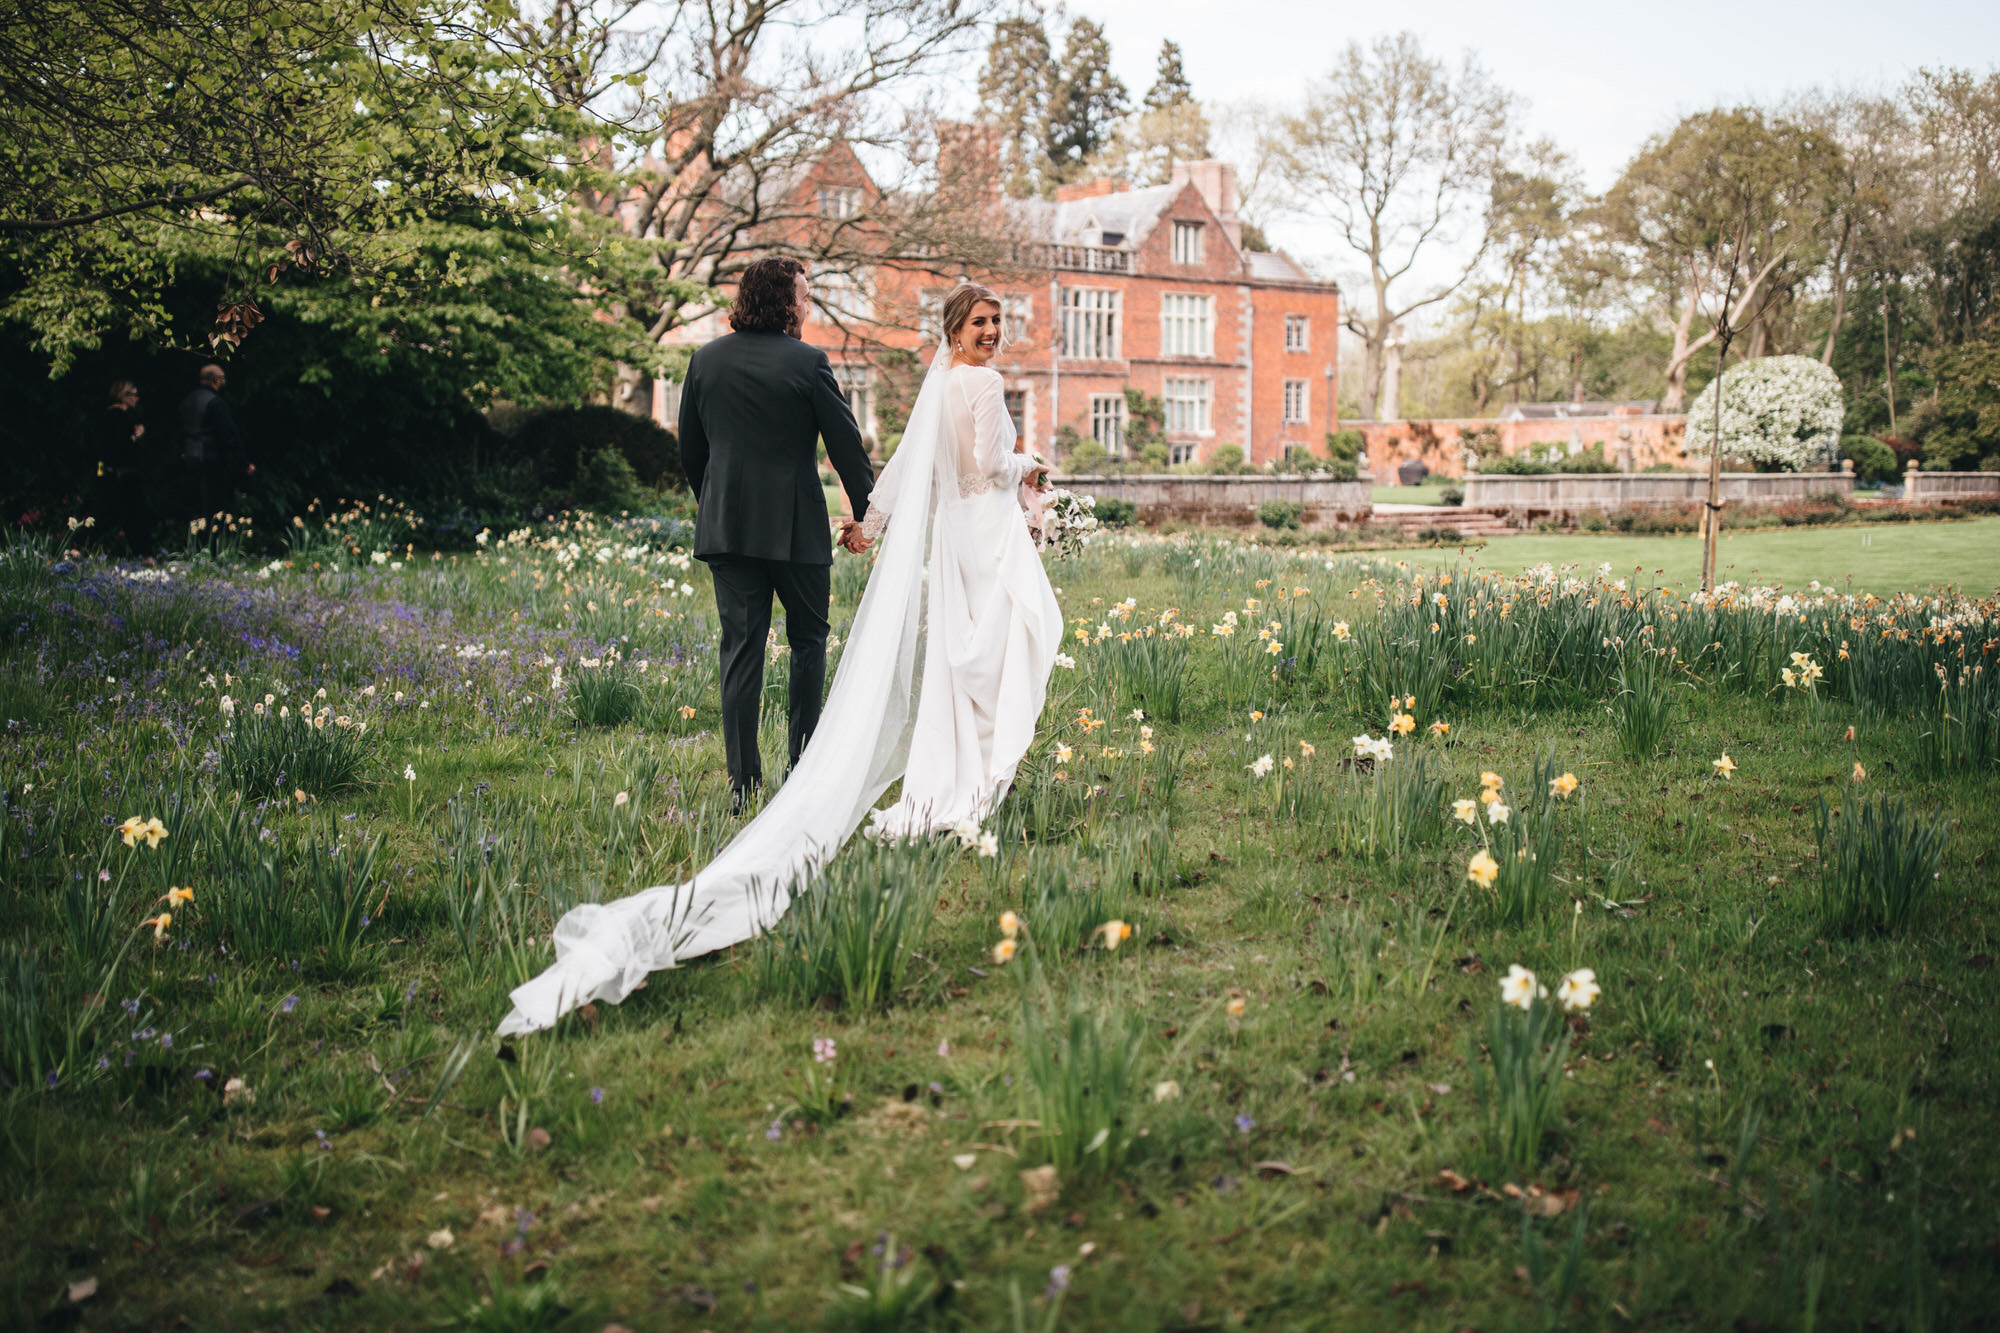 spring flowers on grass floor under trees as couple walk away